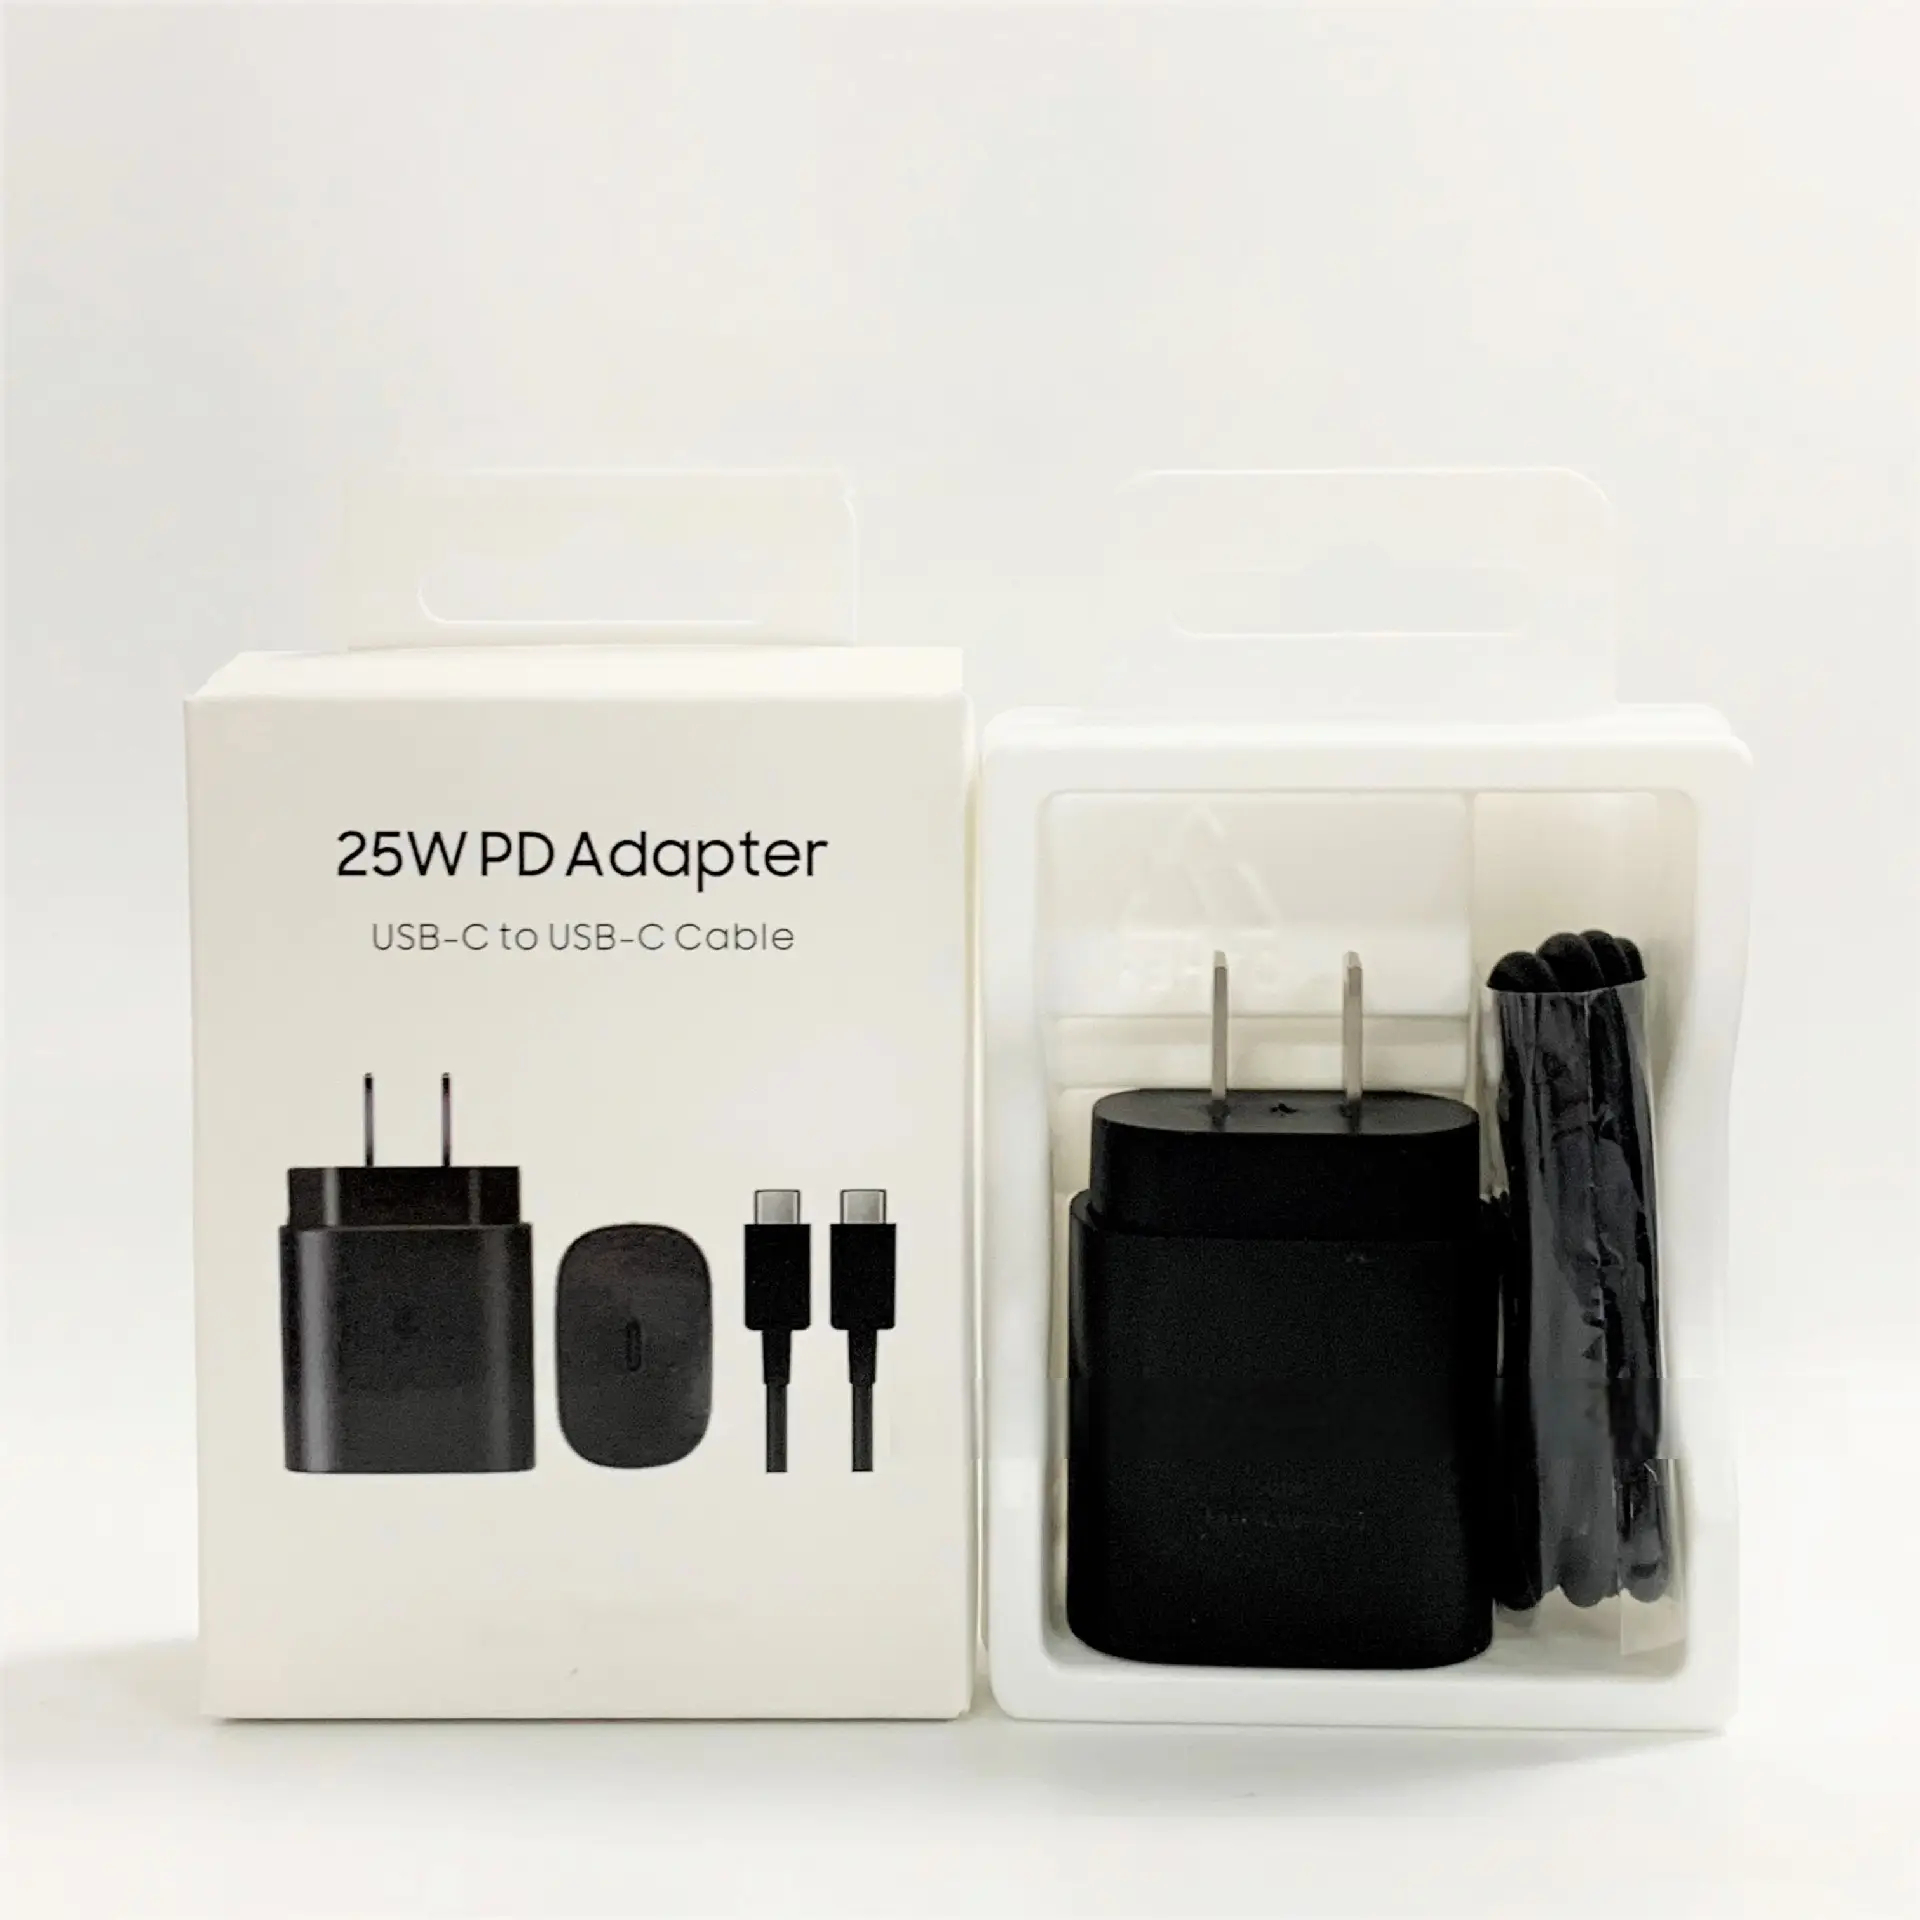 25w PD Adapter UBS-C to USB-C Cable